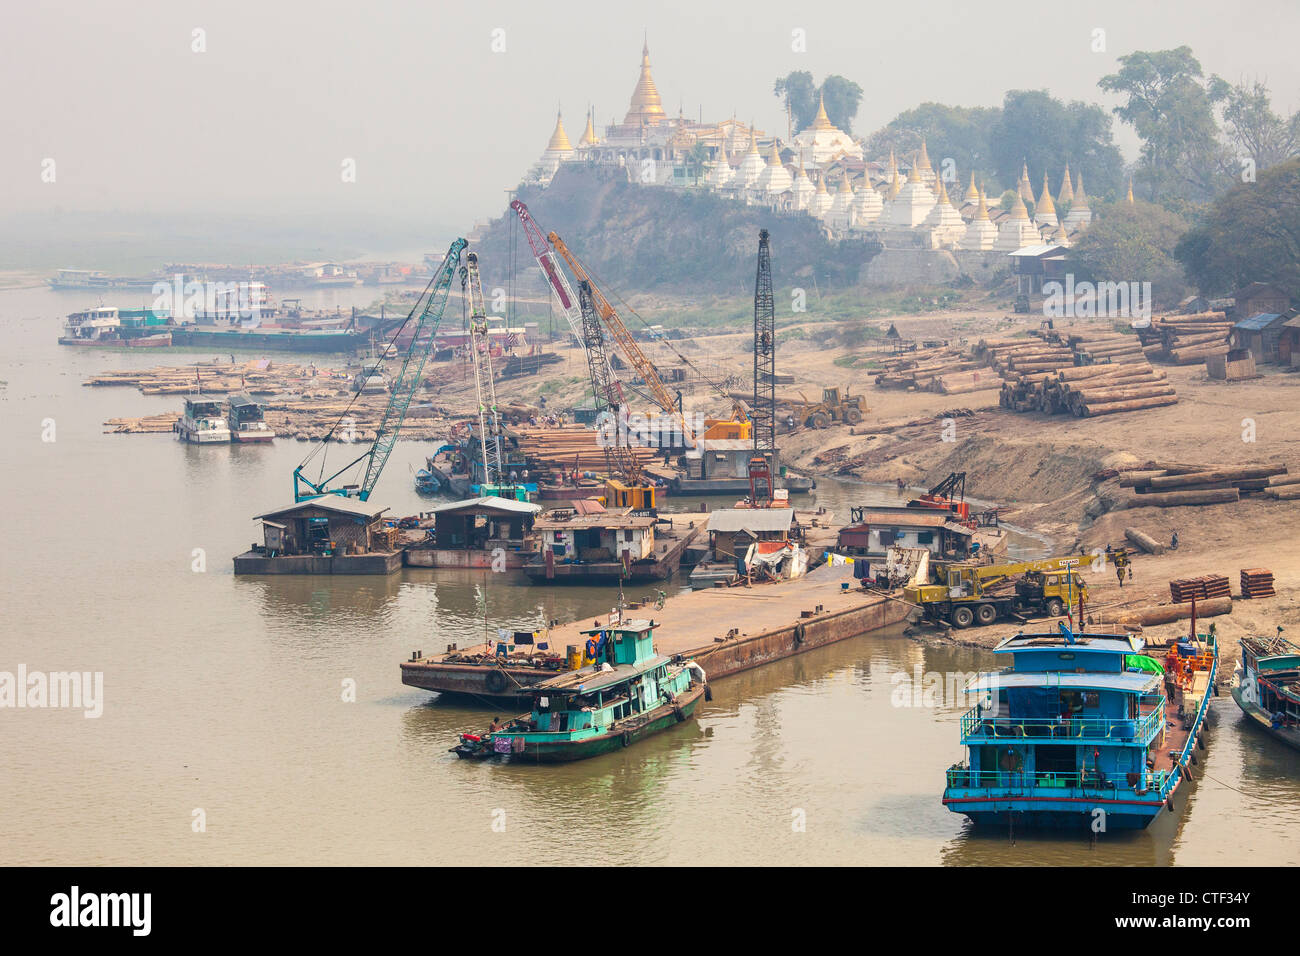 Log transport operation and Shwe-kyet-kay Buddhist Temple on the Irrawaddy River near Sagaing Myanmar Stock Photo